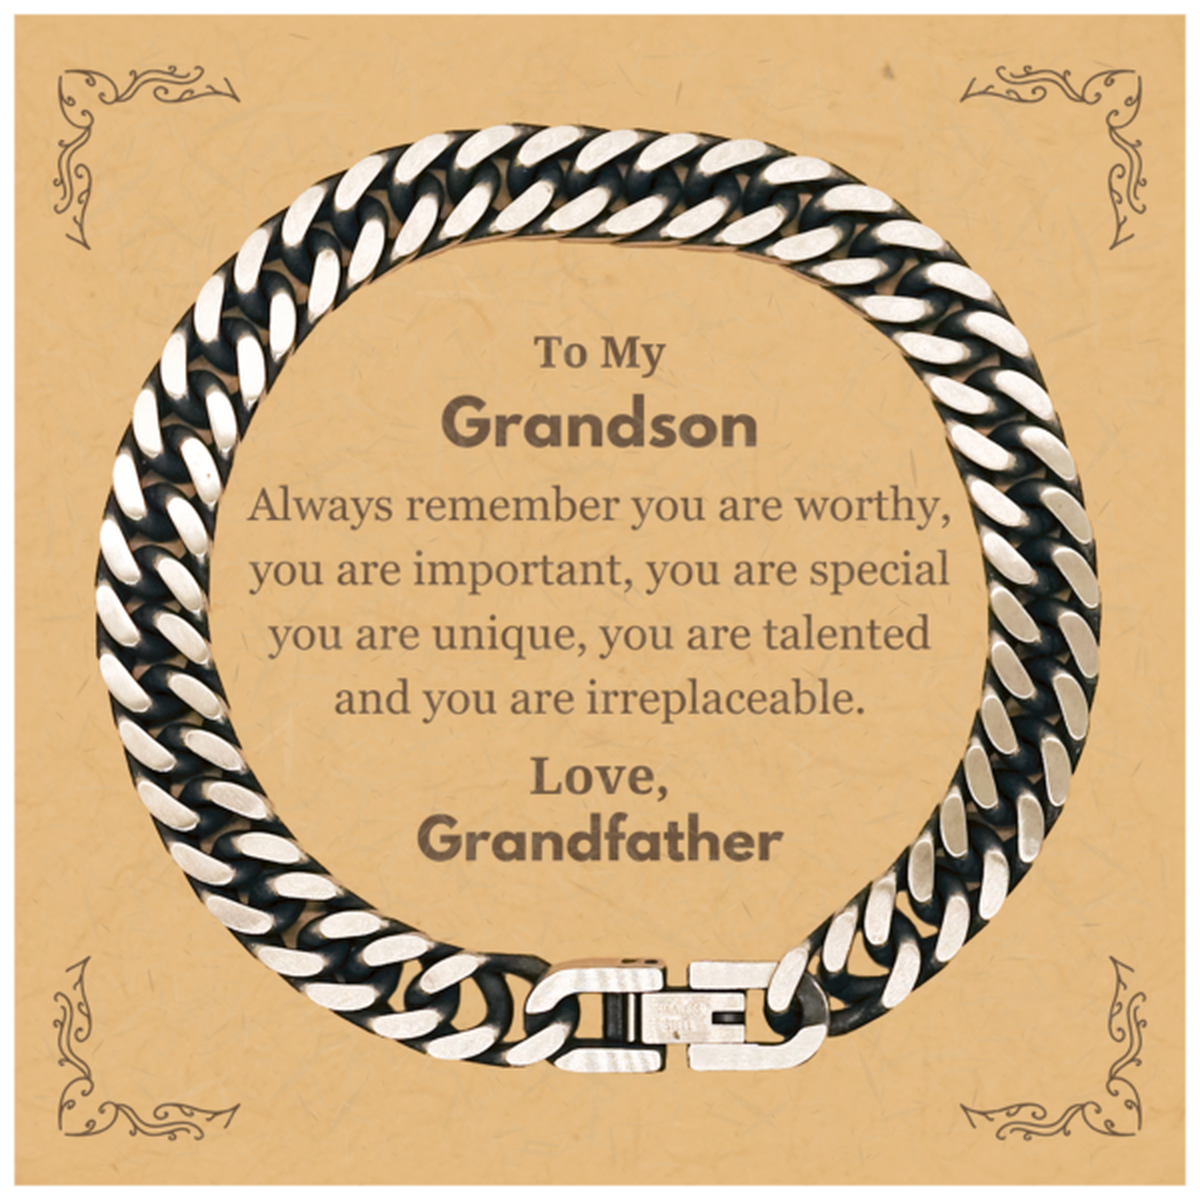 Grandson Birthday Gifts from Grandfather, Inspirational Cuban Link Chain Bracelet for Grandson Christmas Graduation Gifts for Grandson Always remember you are worthy, you are important. Love, Grandfather